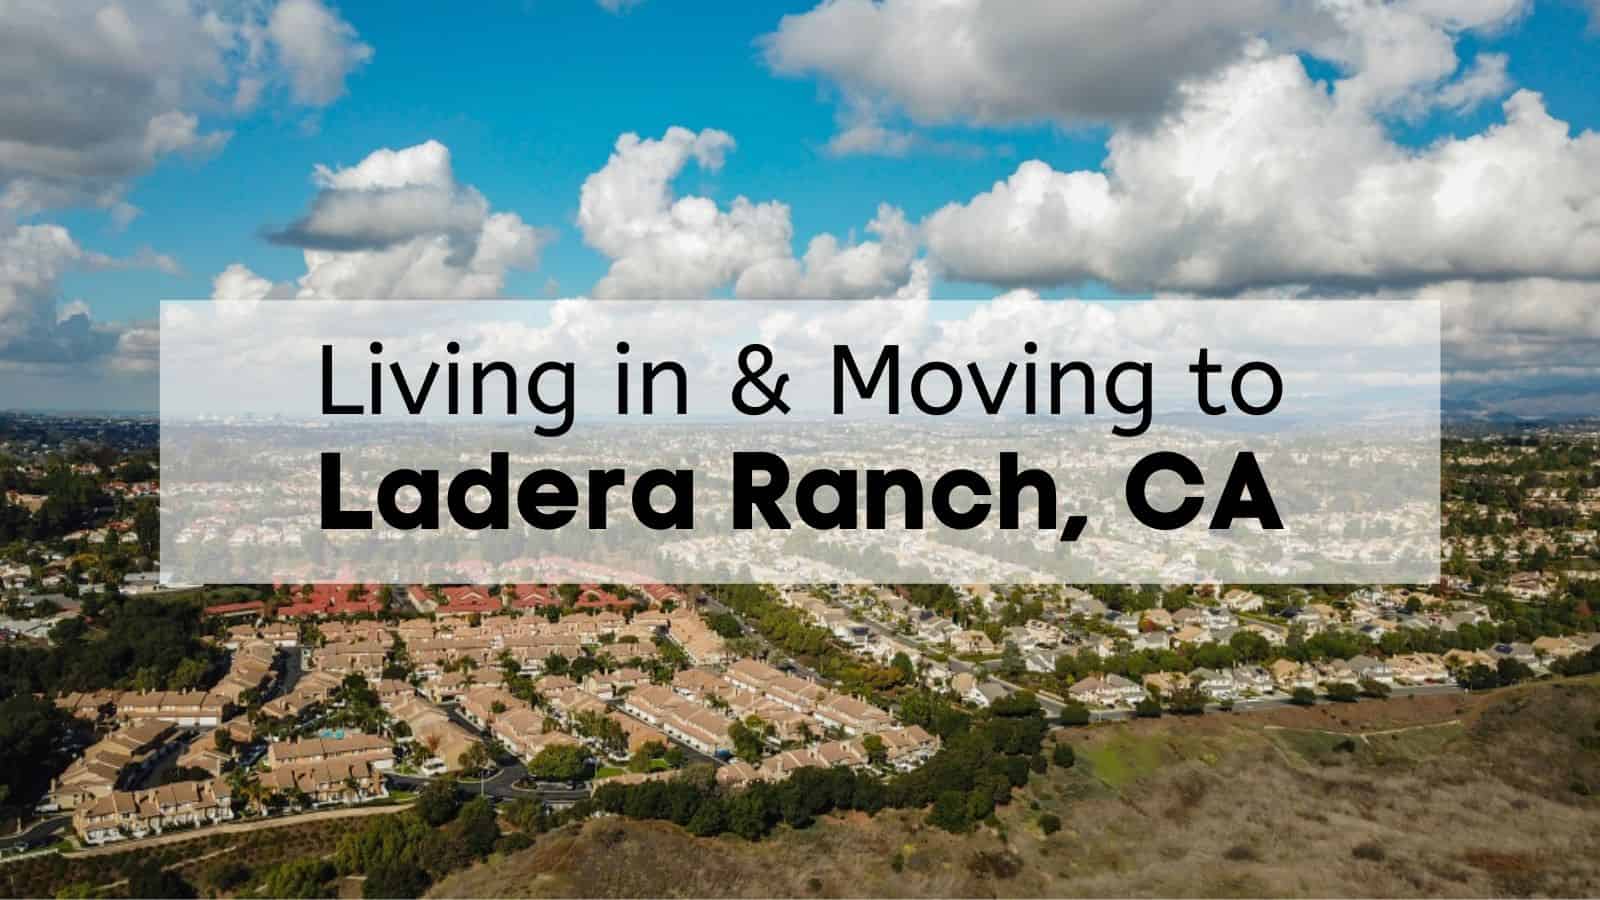 Living in & Moving to Ladera Ranch, CA